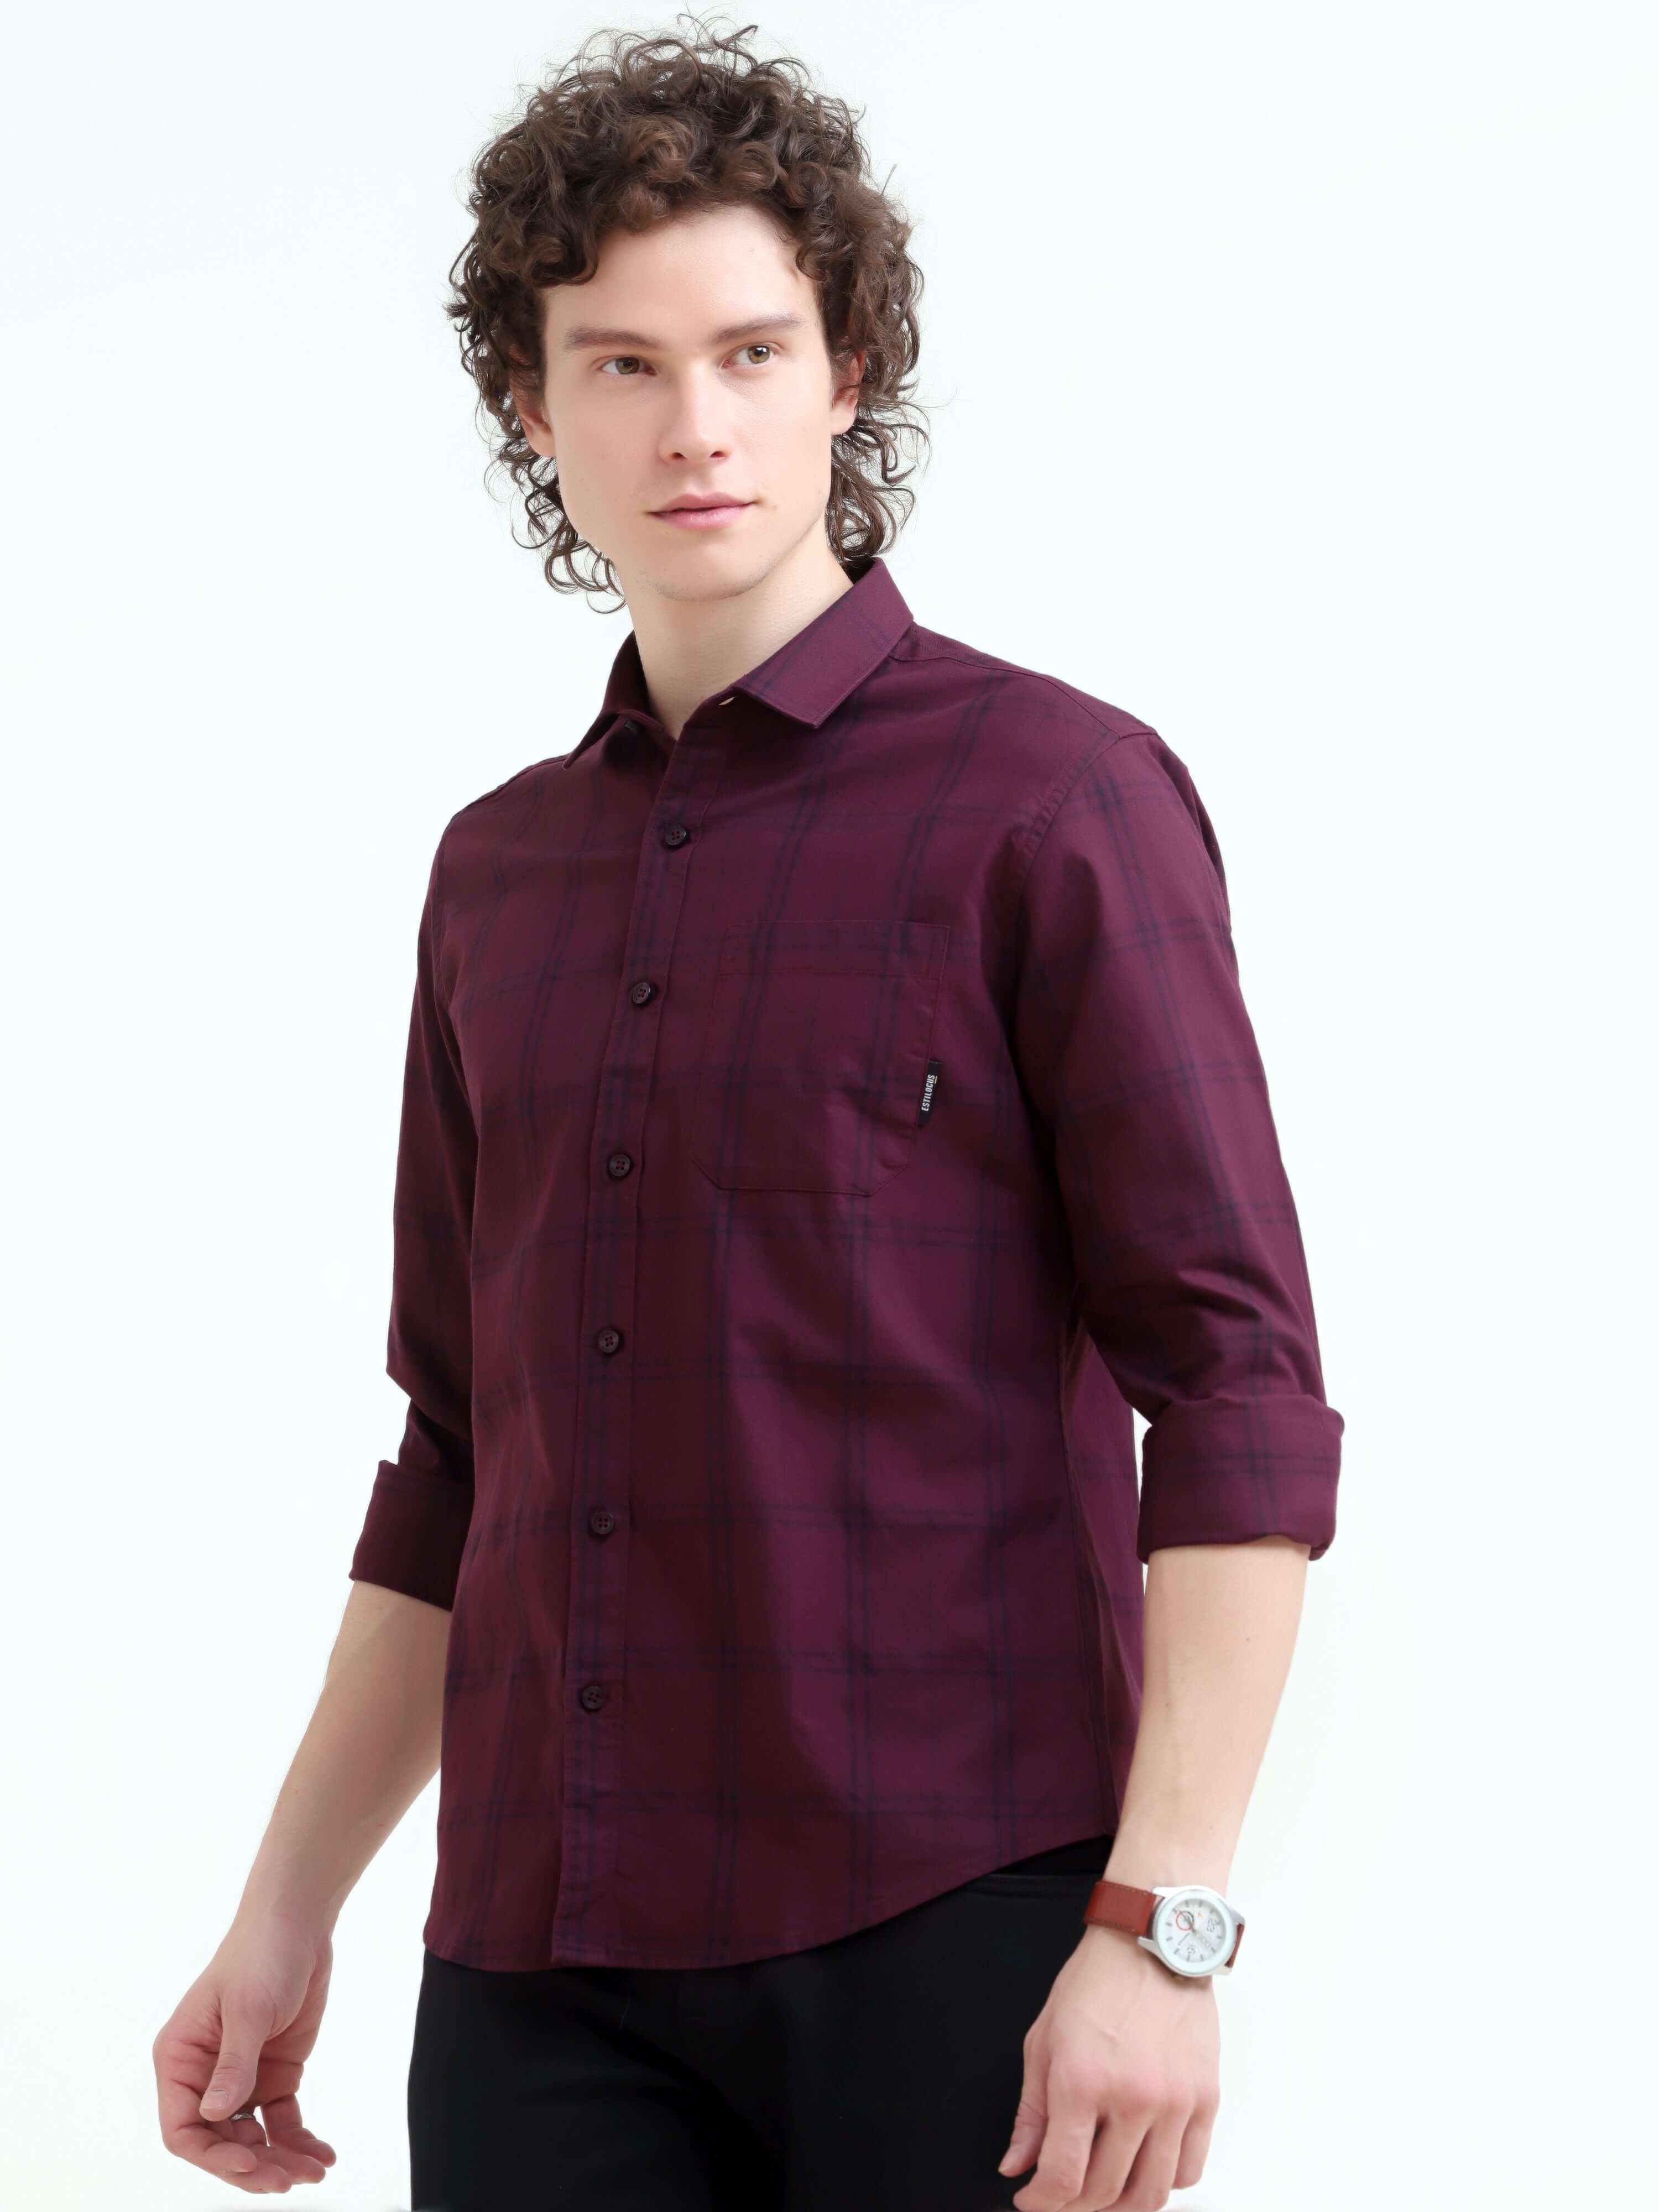 Solan Maroon Check Shirt - New Men’s Summer Casual Wear shop online at Estilocus. Elevate your style with the Solan windowpane check shirt. Perfect for summer and versatile for any setting. Shop the latest men's casual trend now!